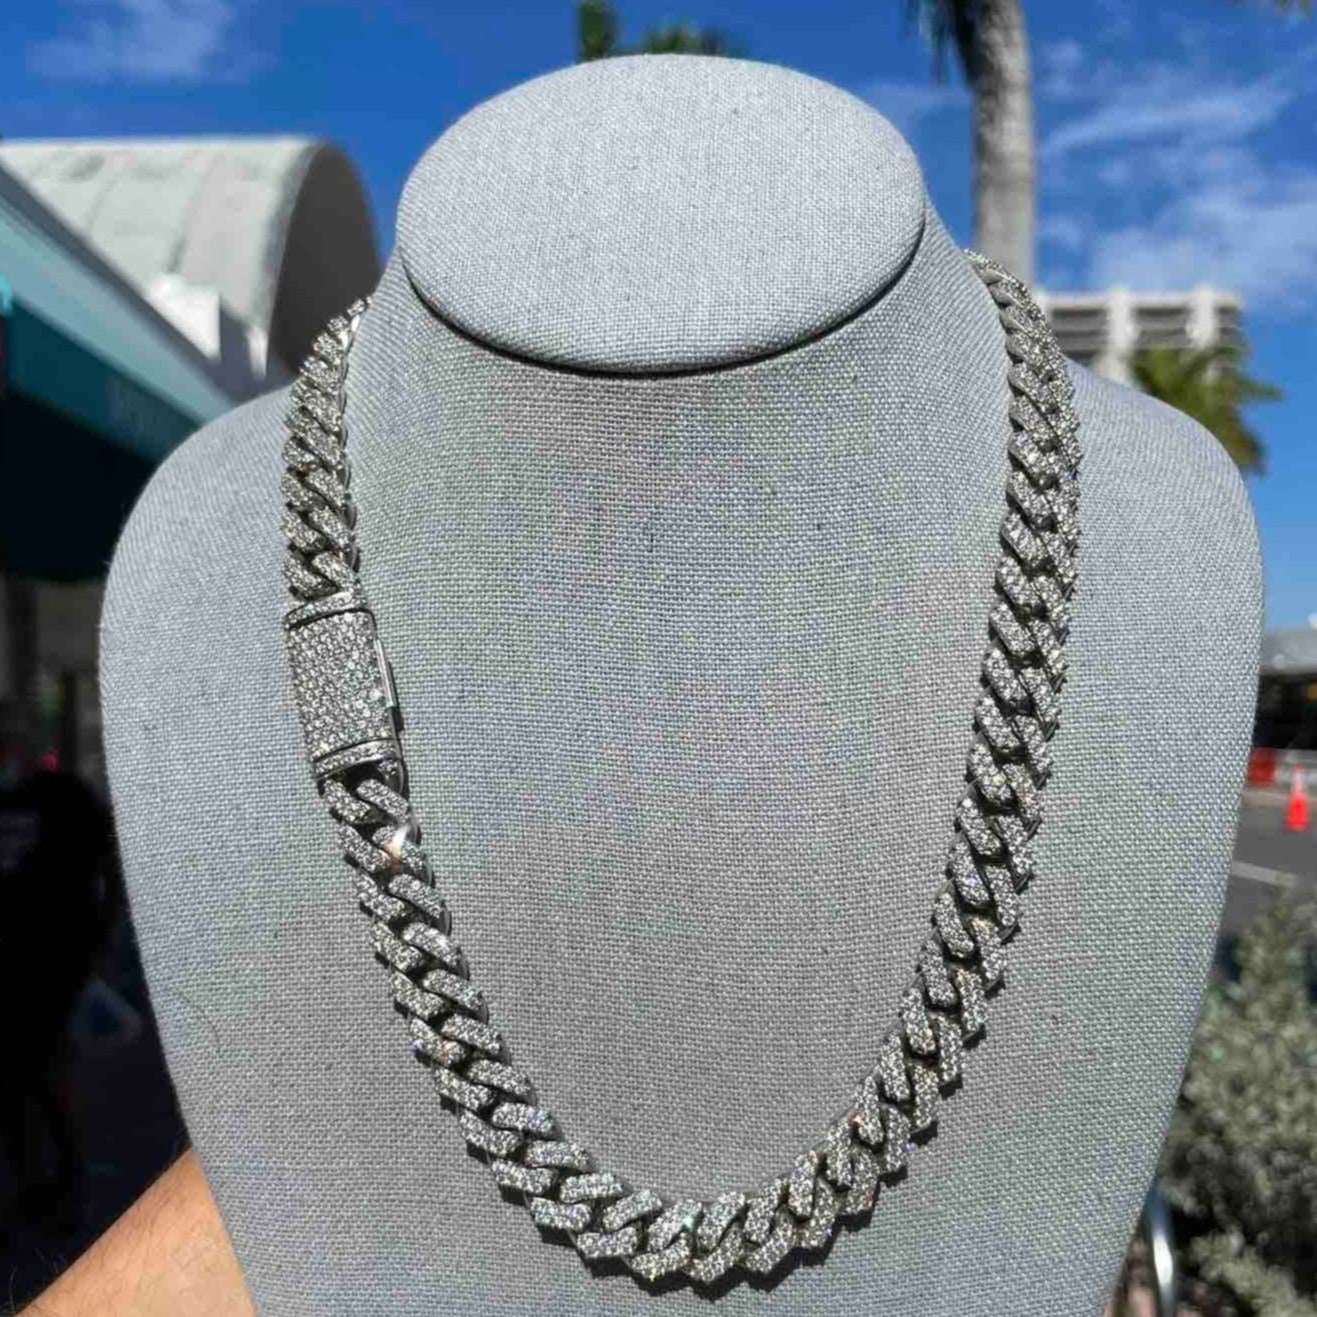 10k "Iced Out Chain" VS1 Miami Cuban Link with 24 cts Natural Diamonds,140 grams, 20 inches, 13.5mm Bust Down Necklace on Miami Beach at Renee dE Paris jewelry